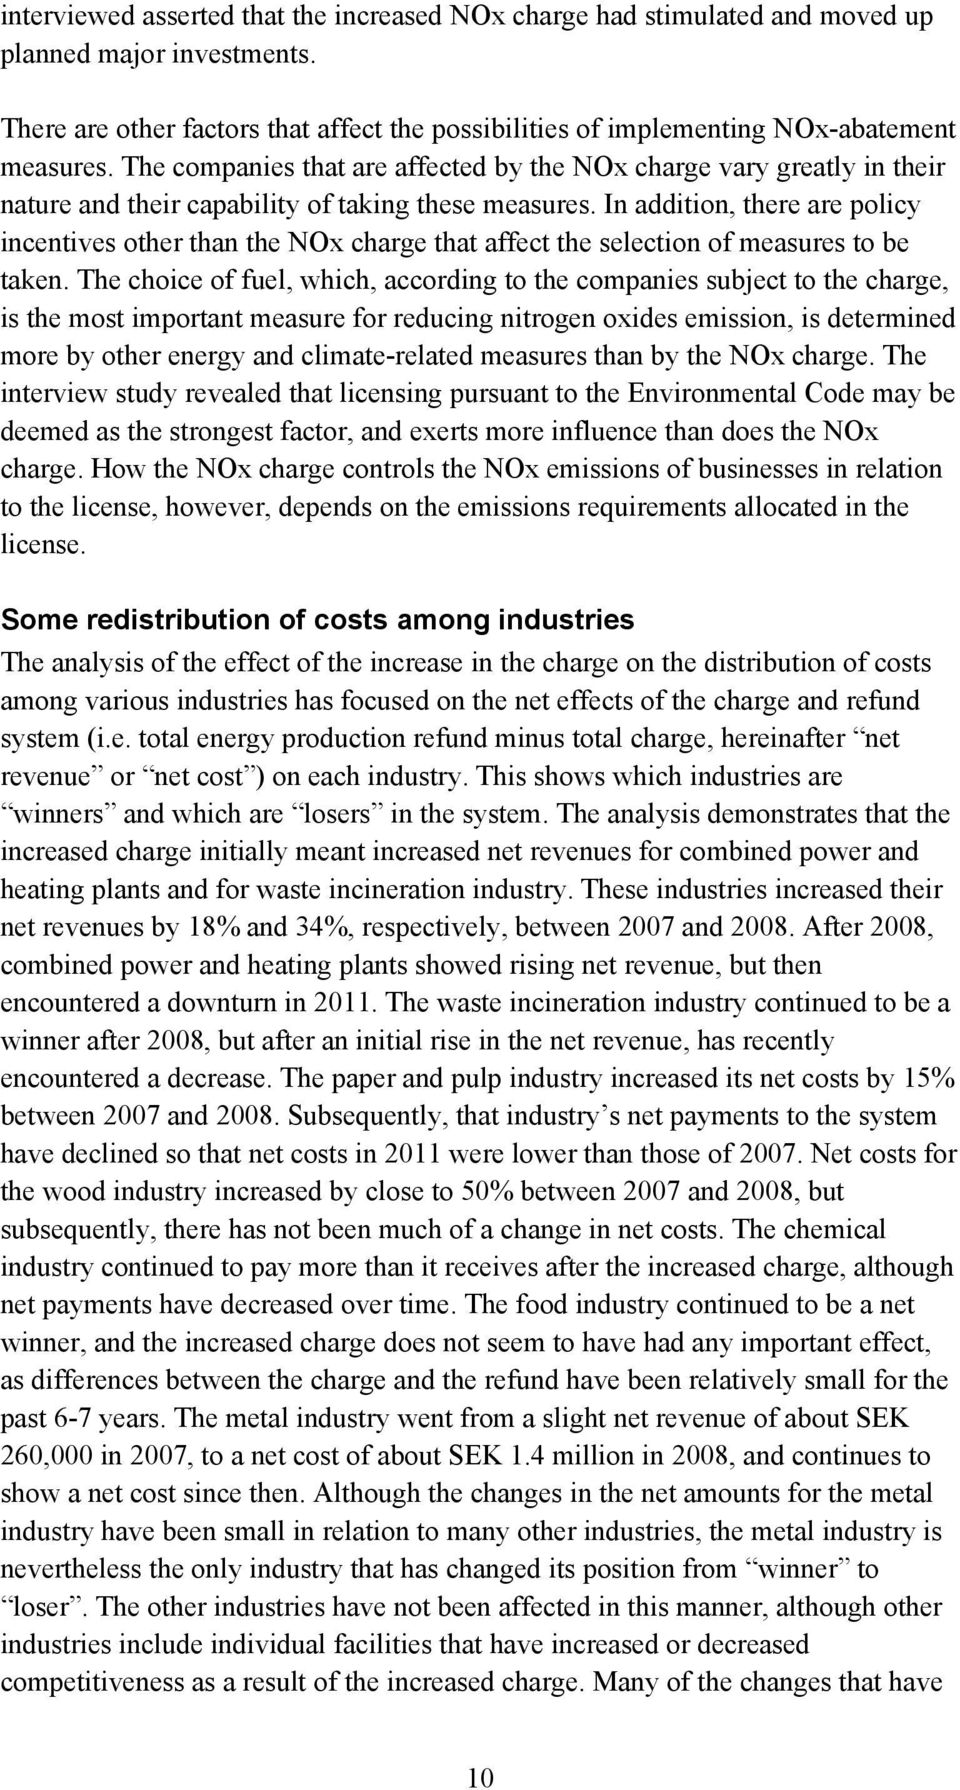 In addition, there are policy incentives other than the NOx charge that affect the selection of measures to be taken.